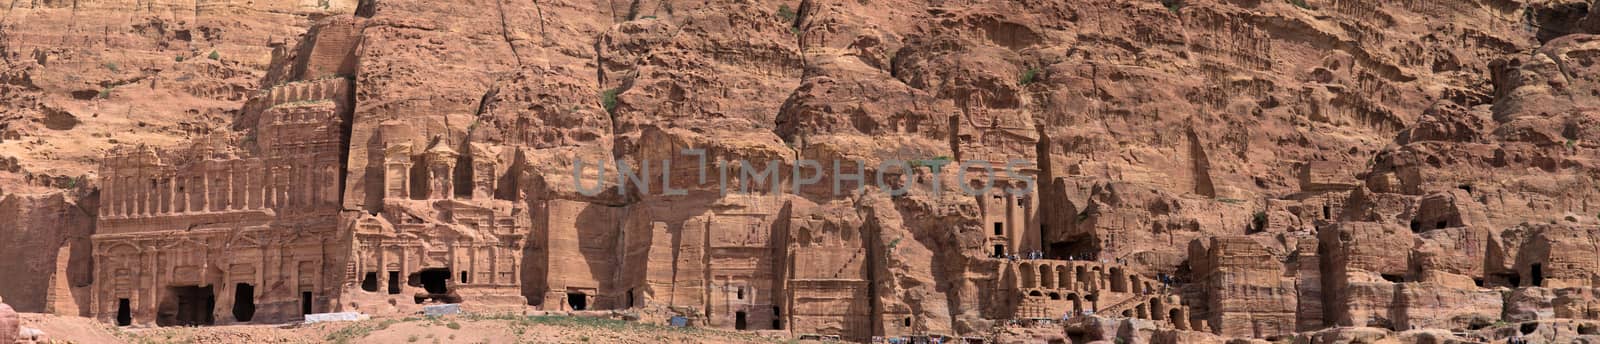 High resolution panorama of the rock city of Petra, Wadi Musa, Jordan, composed of several photos, stitched